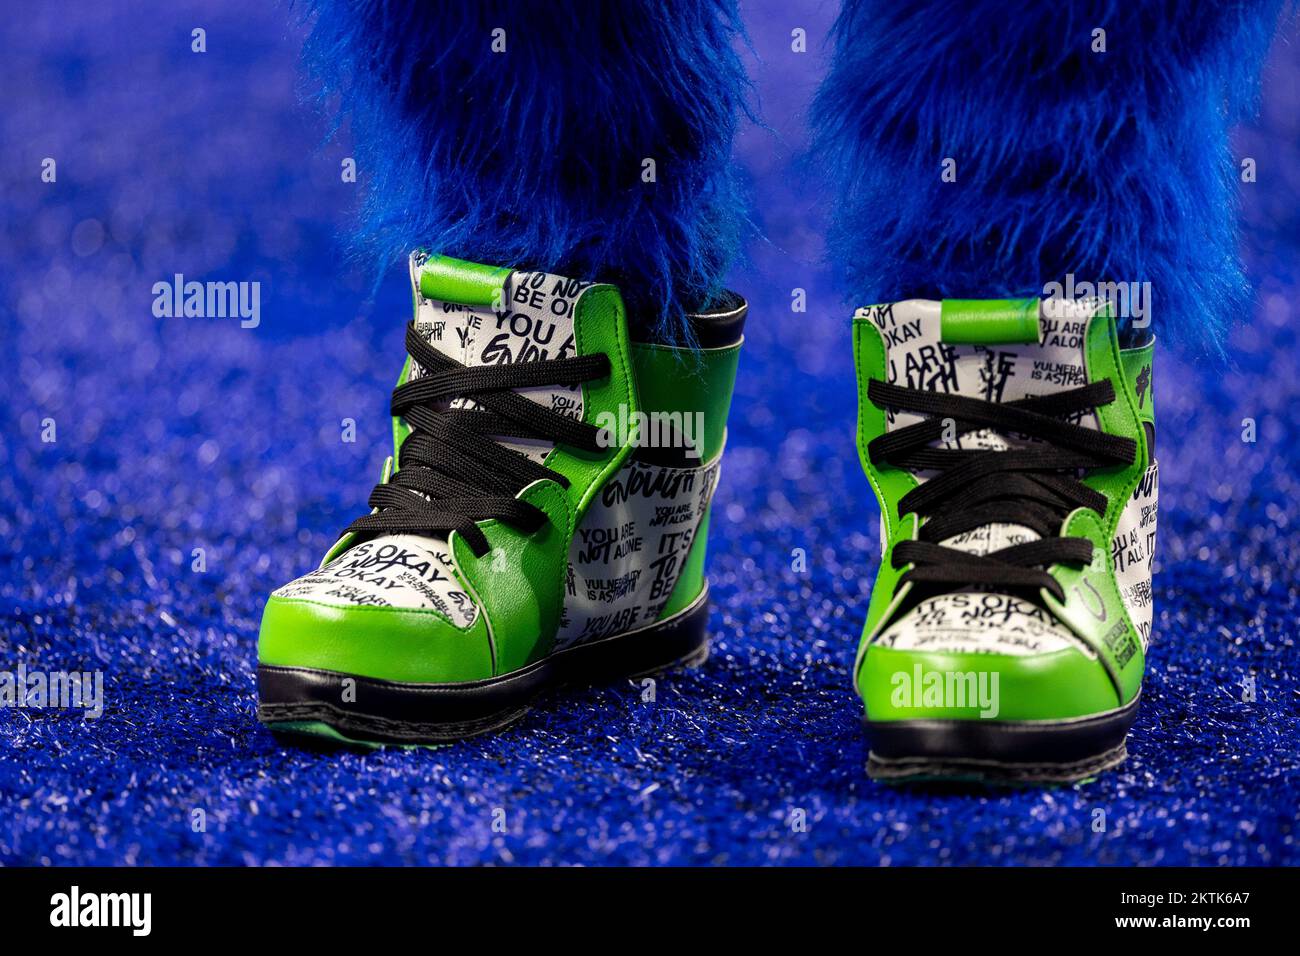 November 28, 2022: Indianapolis Colts mascot Blue wears a Kicking the  Stigma shoes prior to an NFL game between the Pittsburg Steelers and the  Indianapolis Colts in Indianapolis, Indiana. John Mersits/CSM/Sipa  USA.(Credit